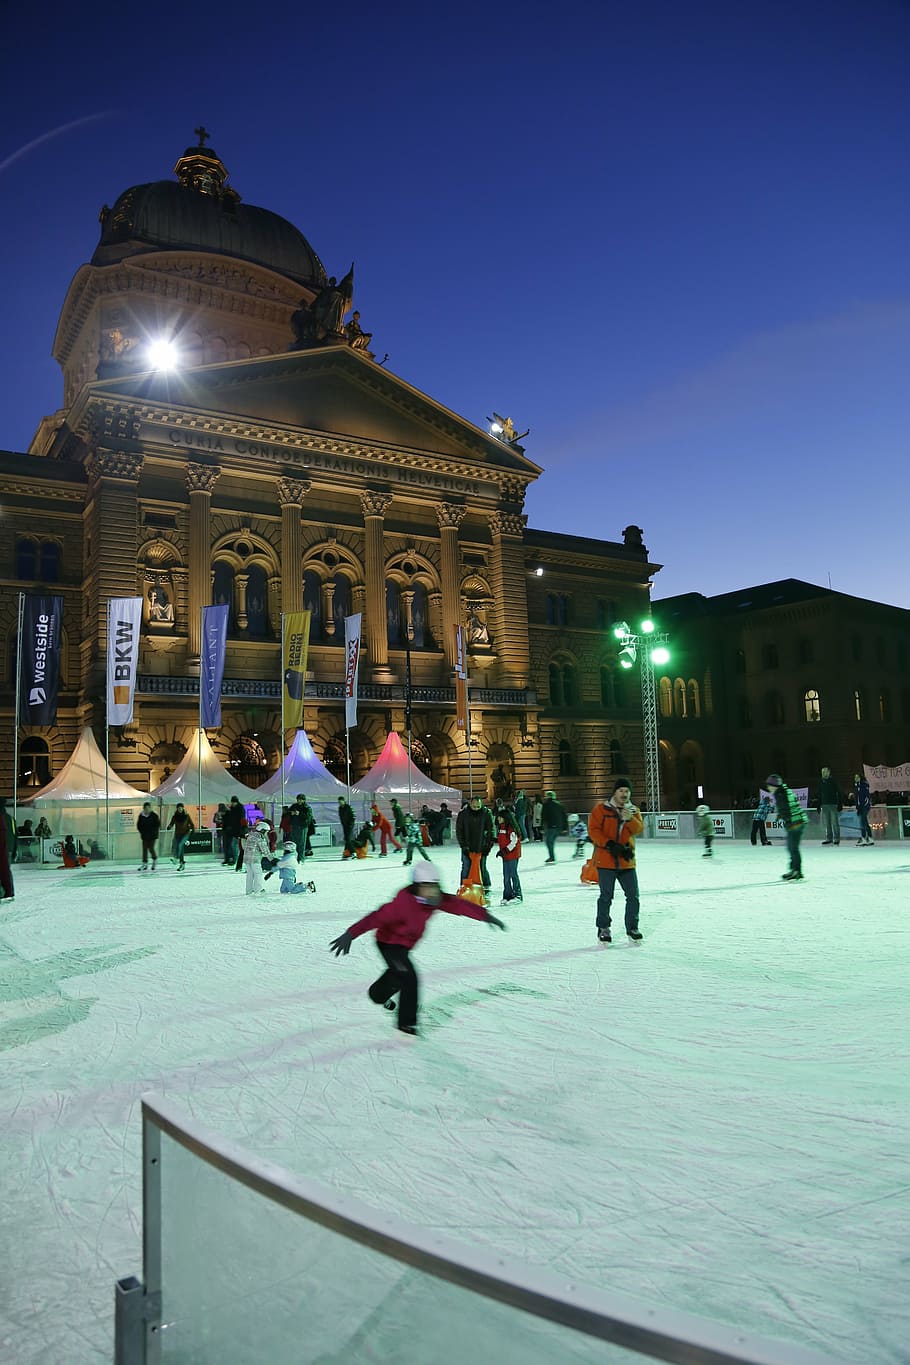 bern, bundeshaus, ice rink, switzerland, group of people, architecture, crowd, built structure, ice, winter sport